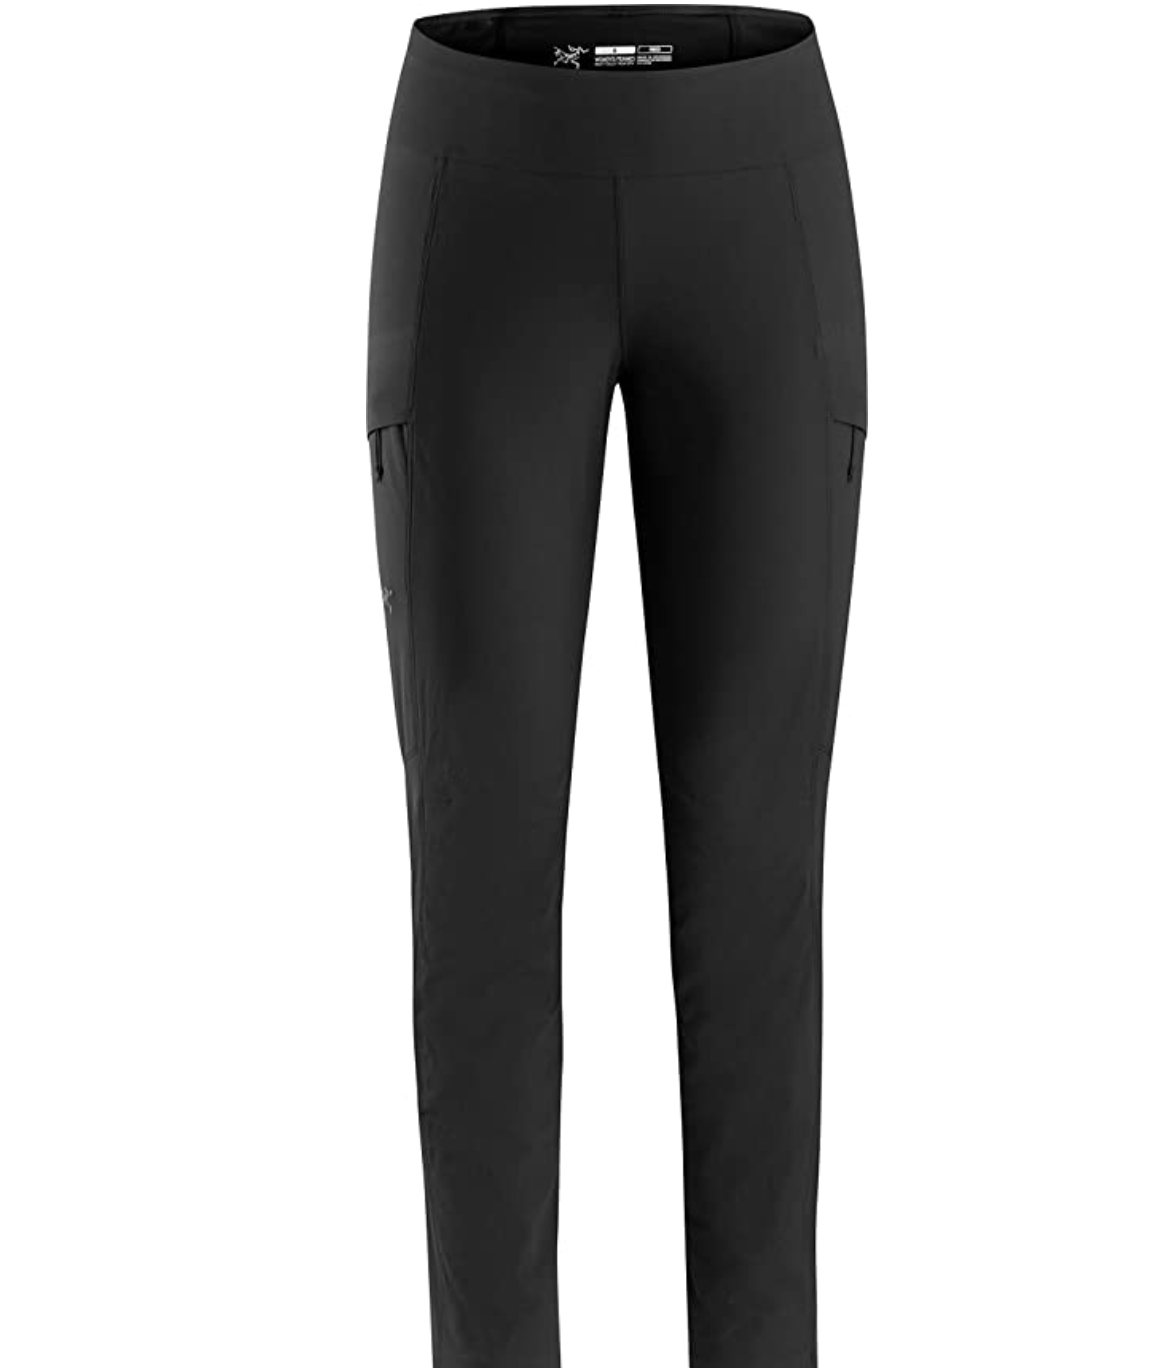 Best Hiking Leggings for Cold Weather - in 2023 - The Hiking Adventure